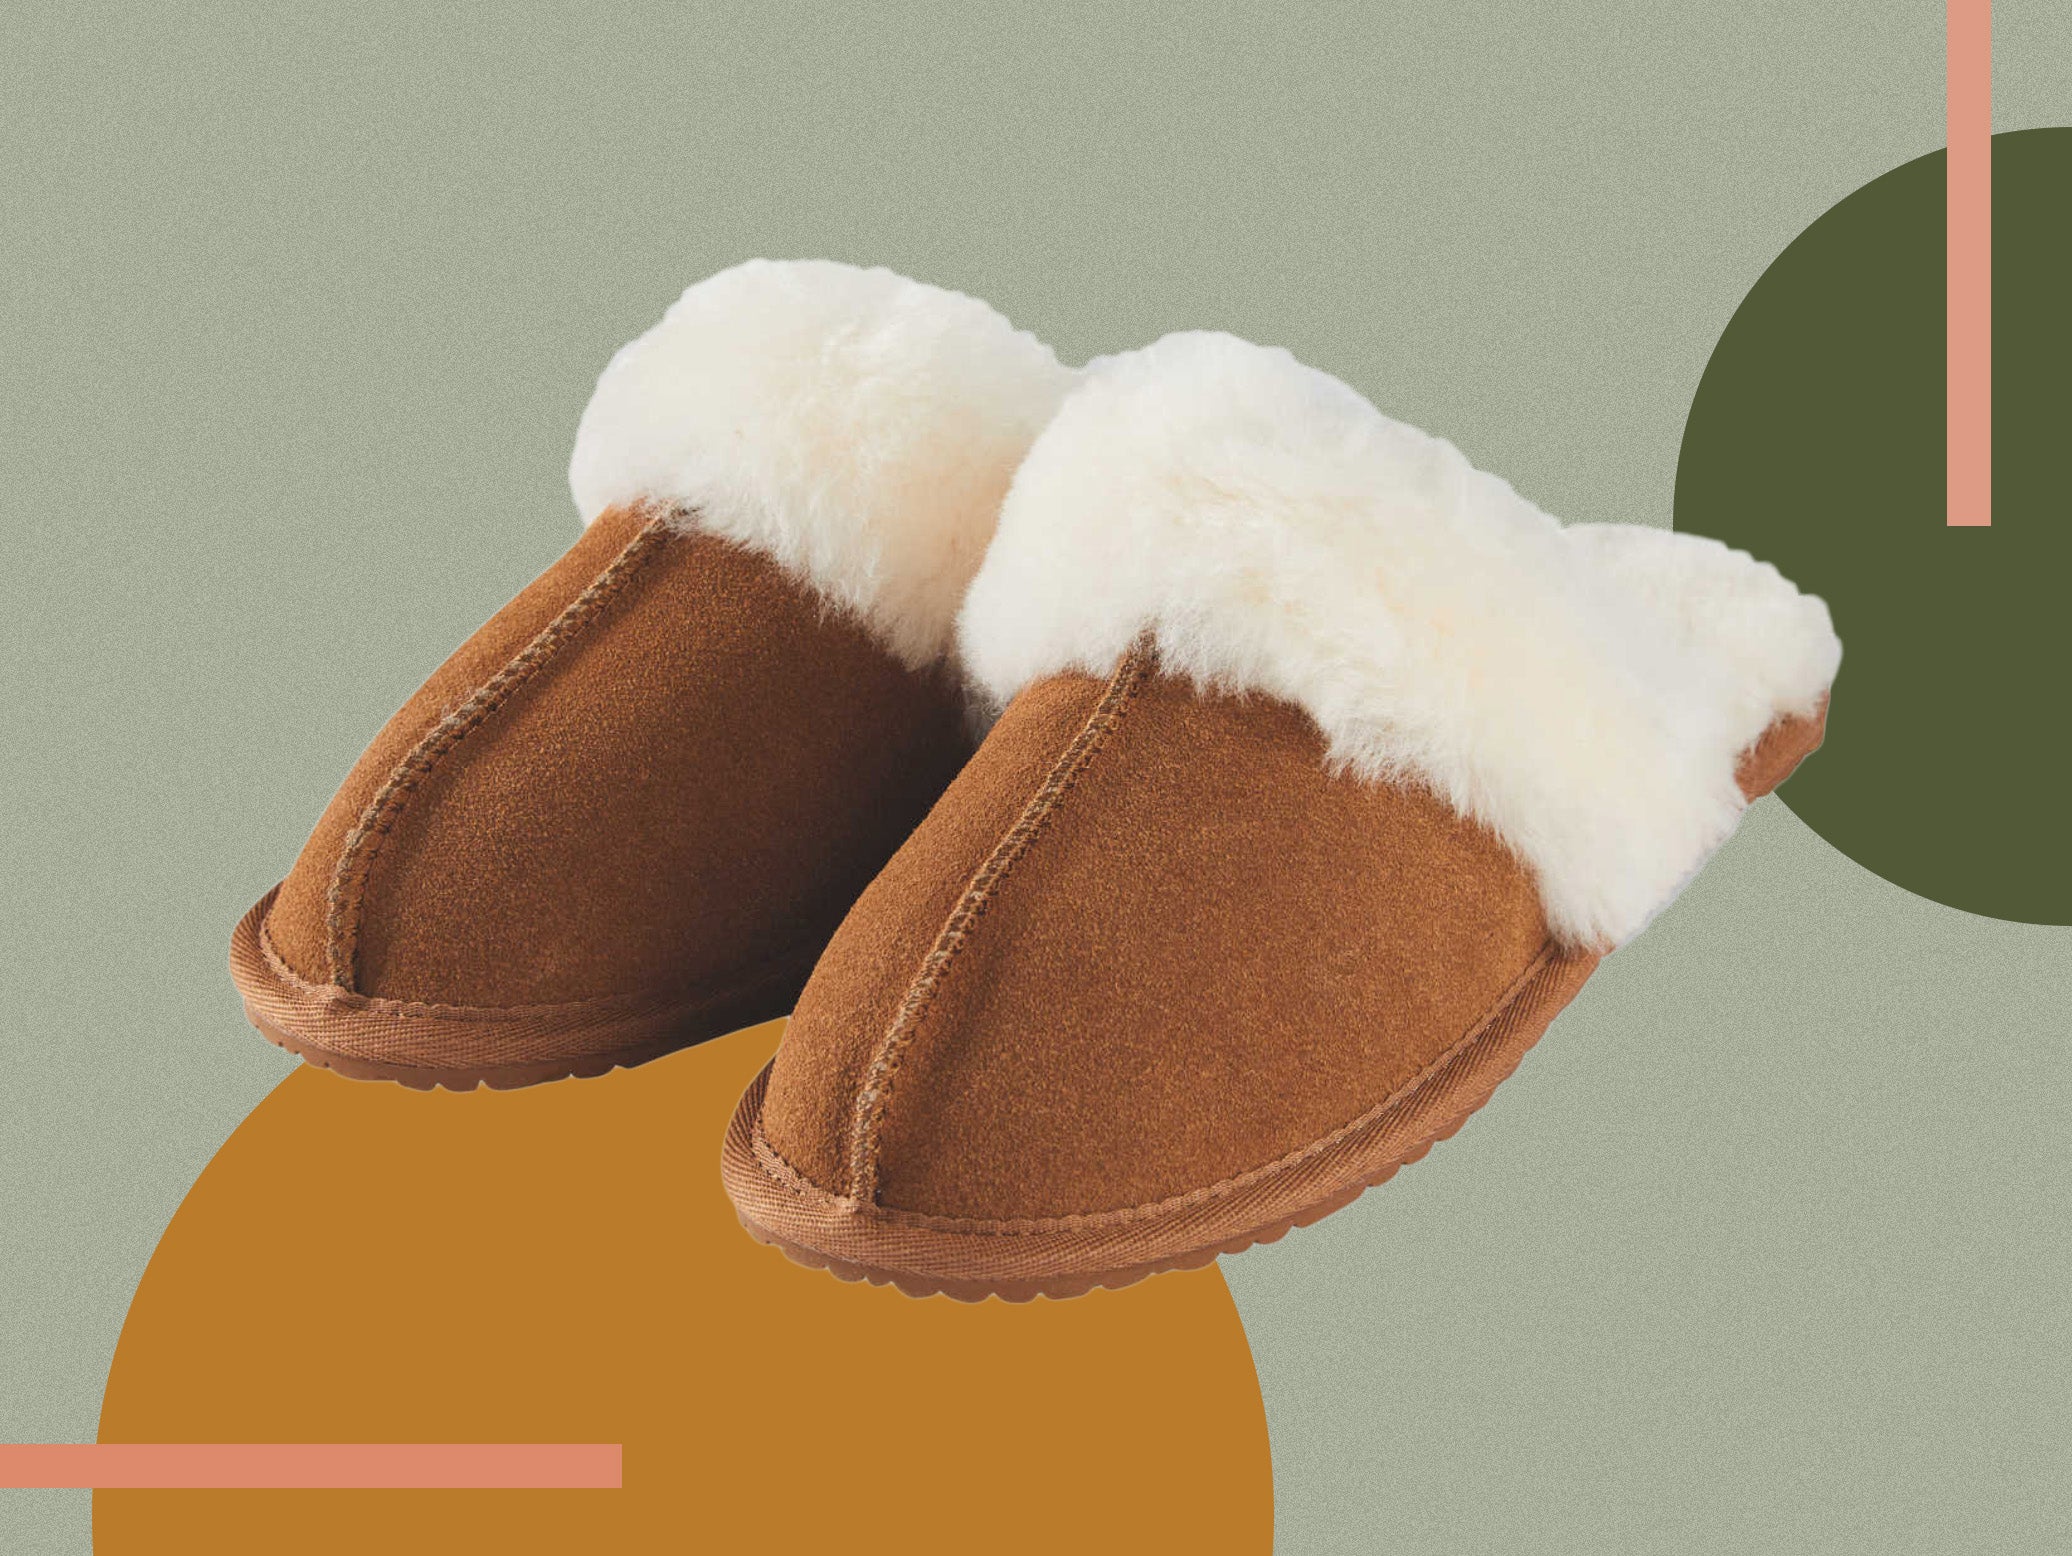 Aldi's sheepskin slippers look almost identical to Uggs but only